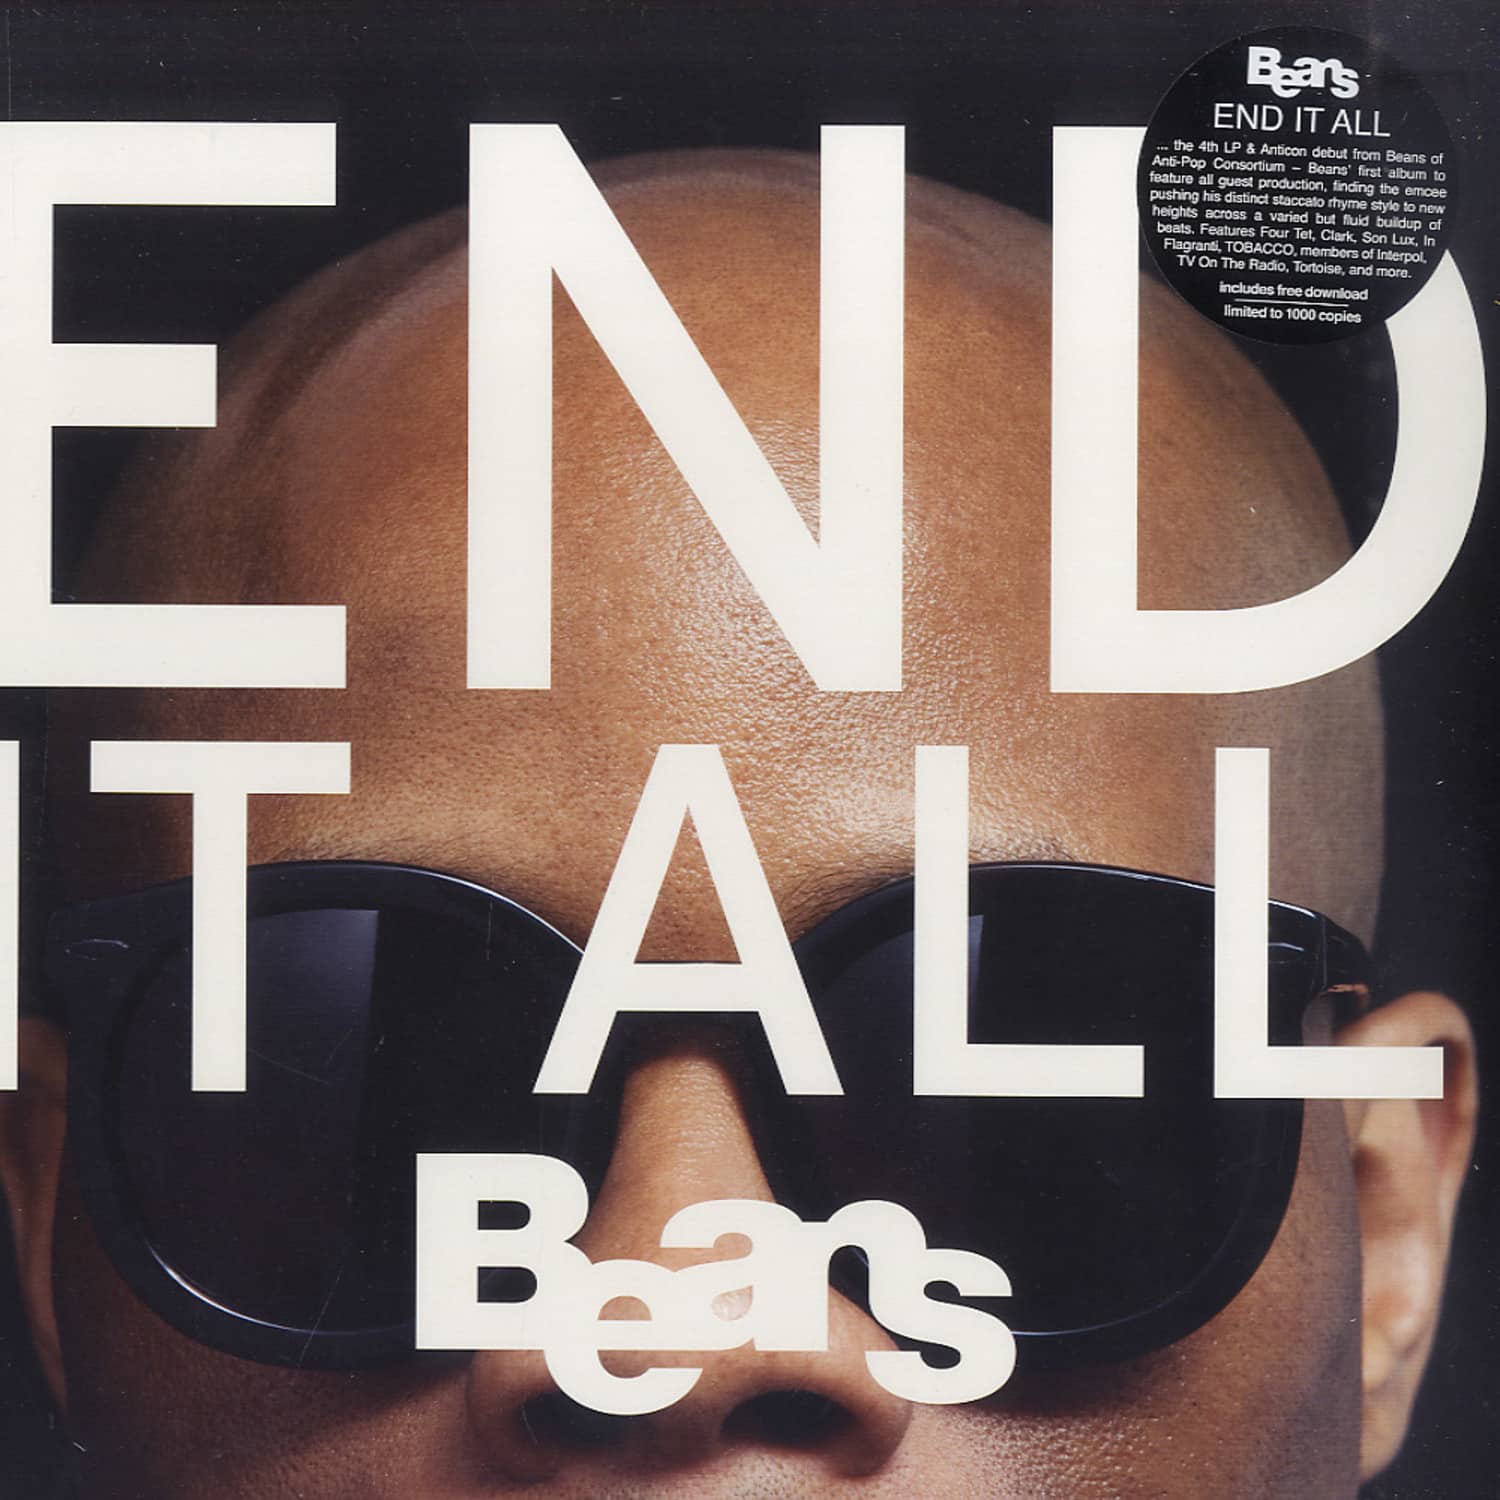 Beans - END IT ALL 